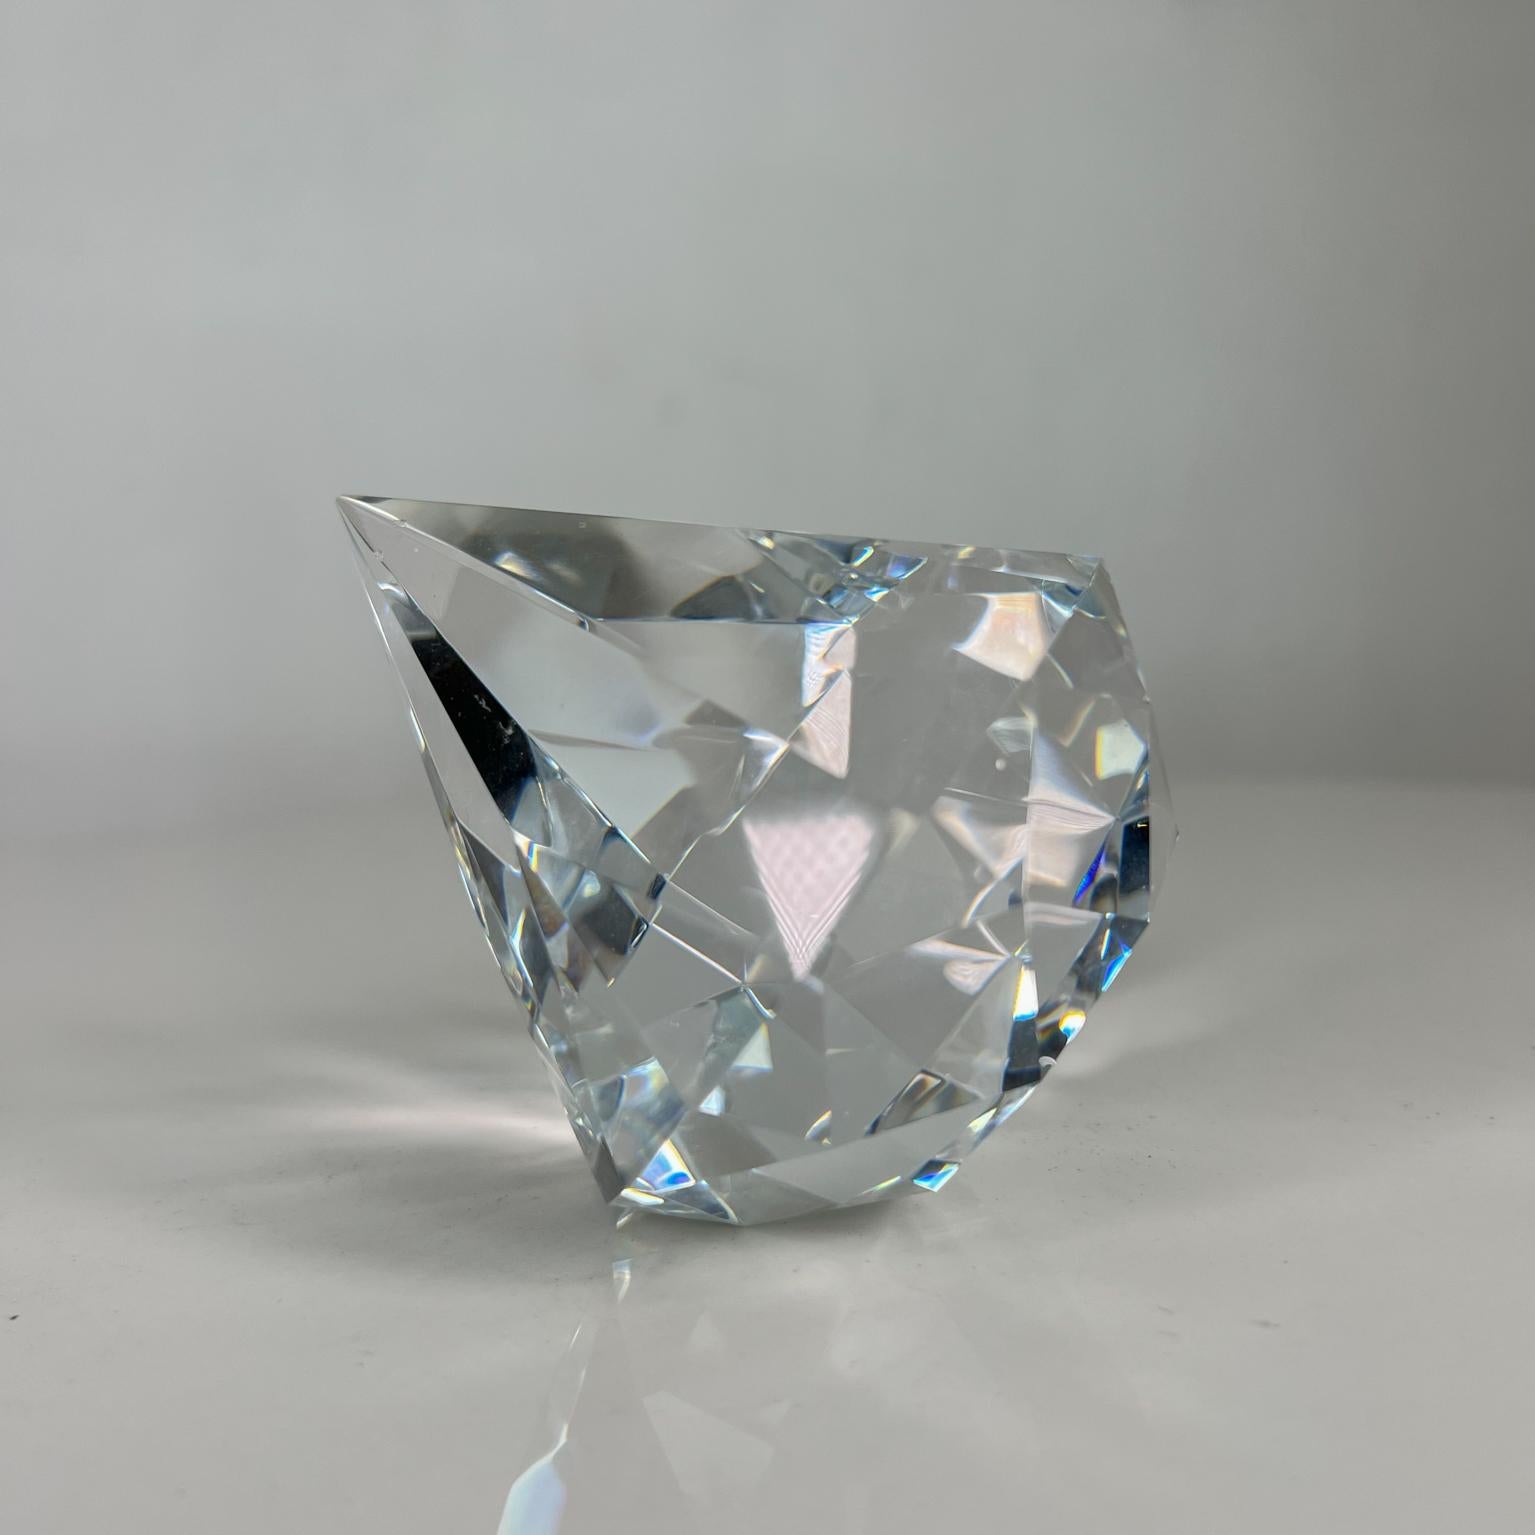 Tiffany & Co Crystal Art Glass Modern Faceted Diamond Paperweight Sculpture 3